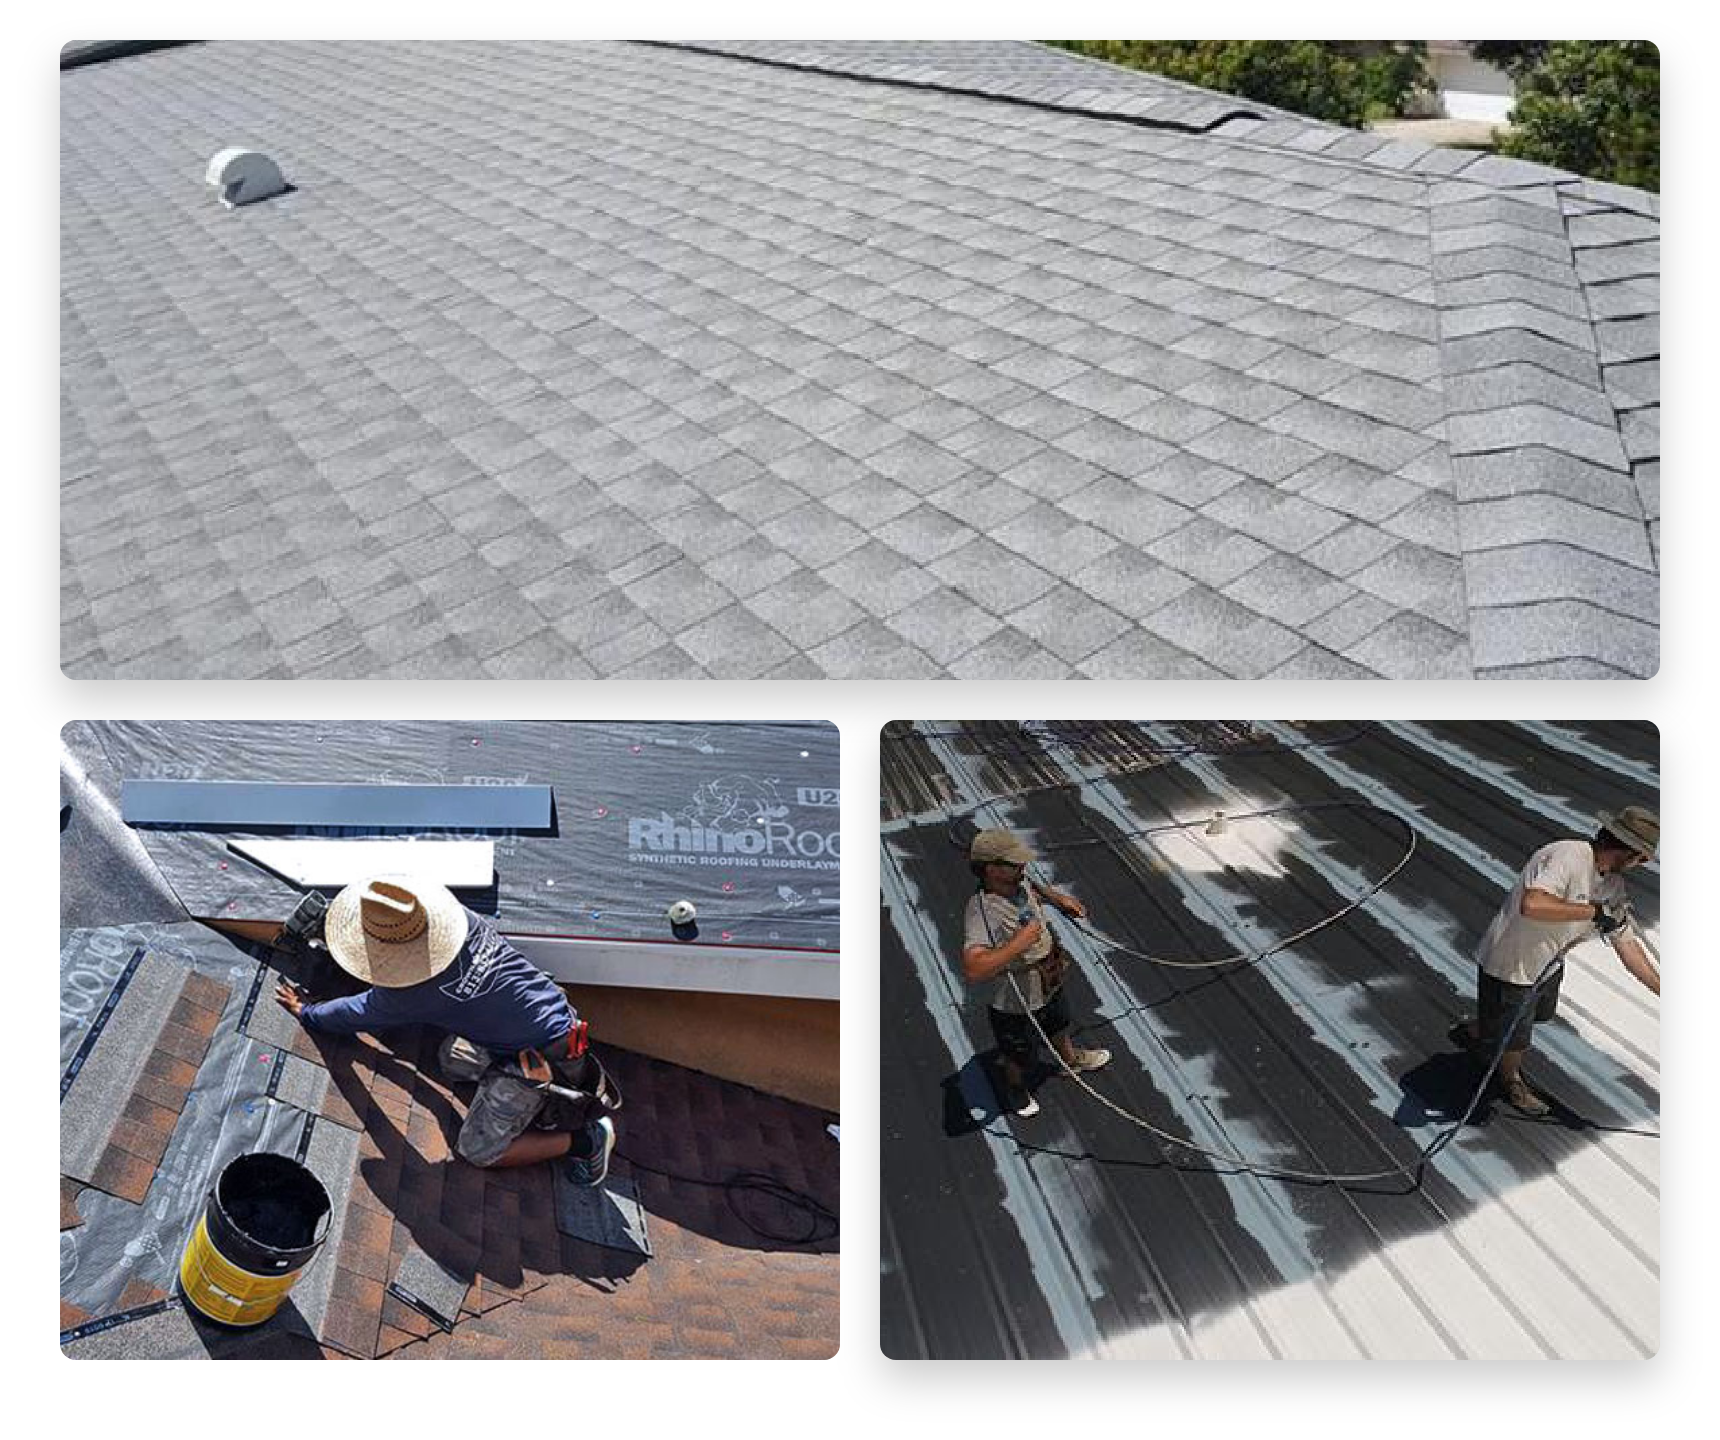 Our roofing contractor providing quality materials and roofing services